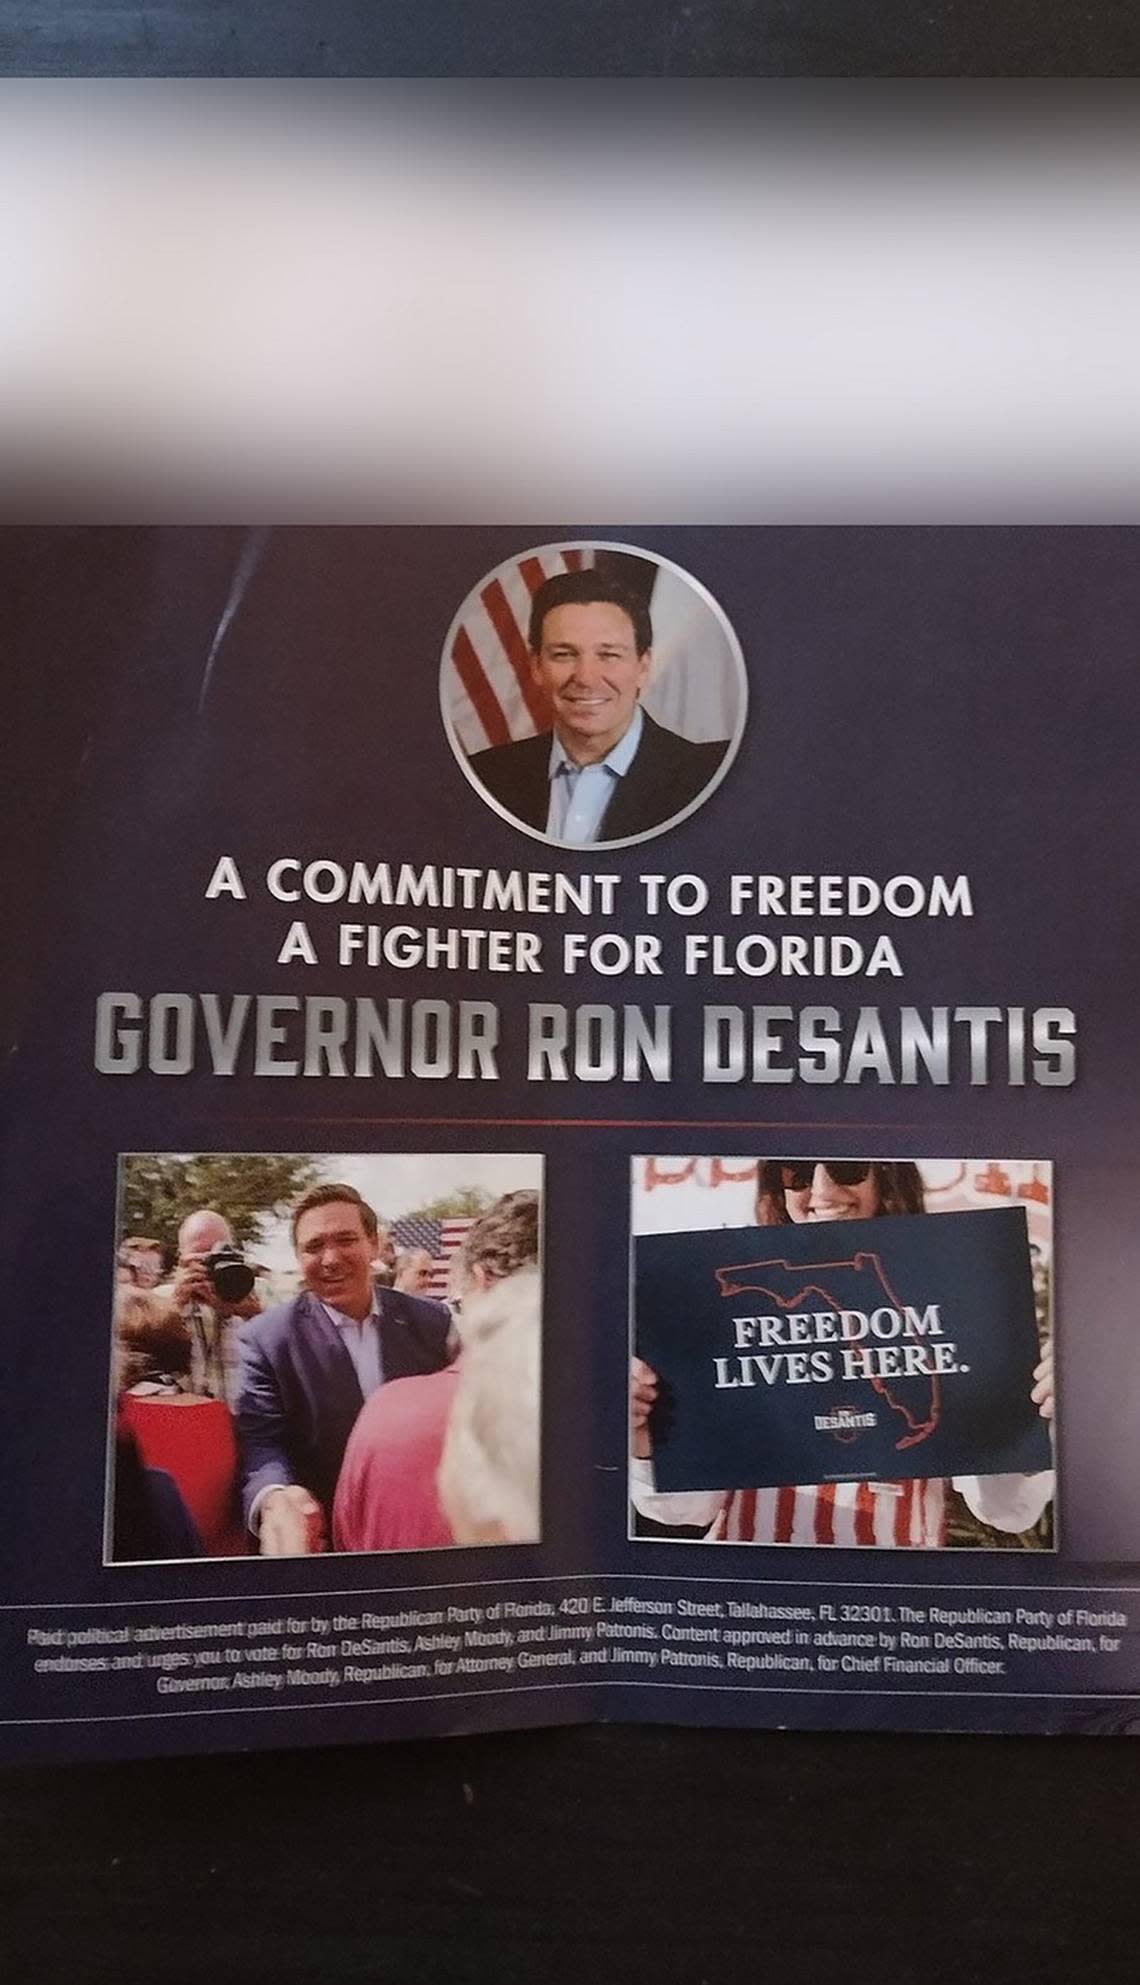 Mailer supporting Florida Gov. Ron DeSantis sent to a voter in Texas from the Republican Party of Florida.